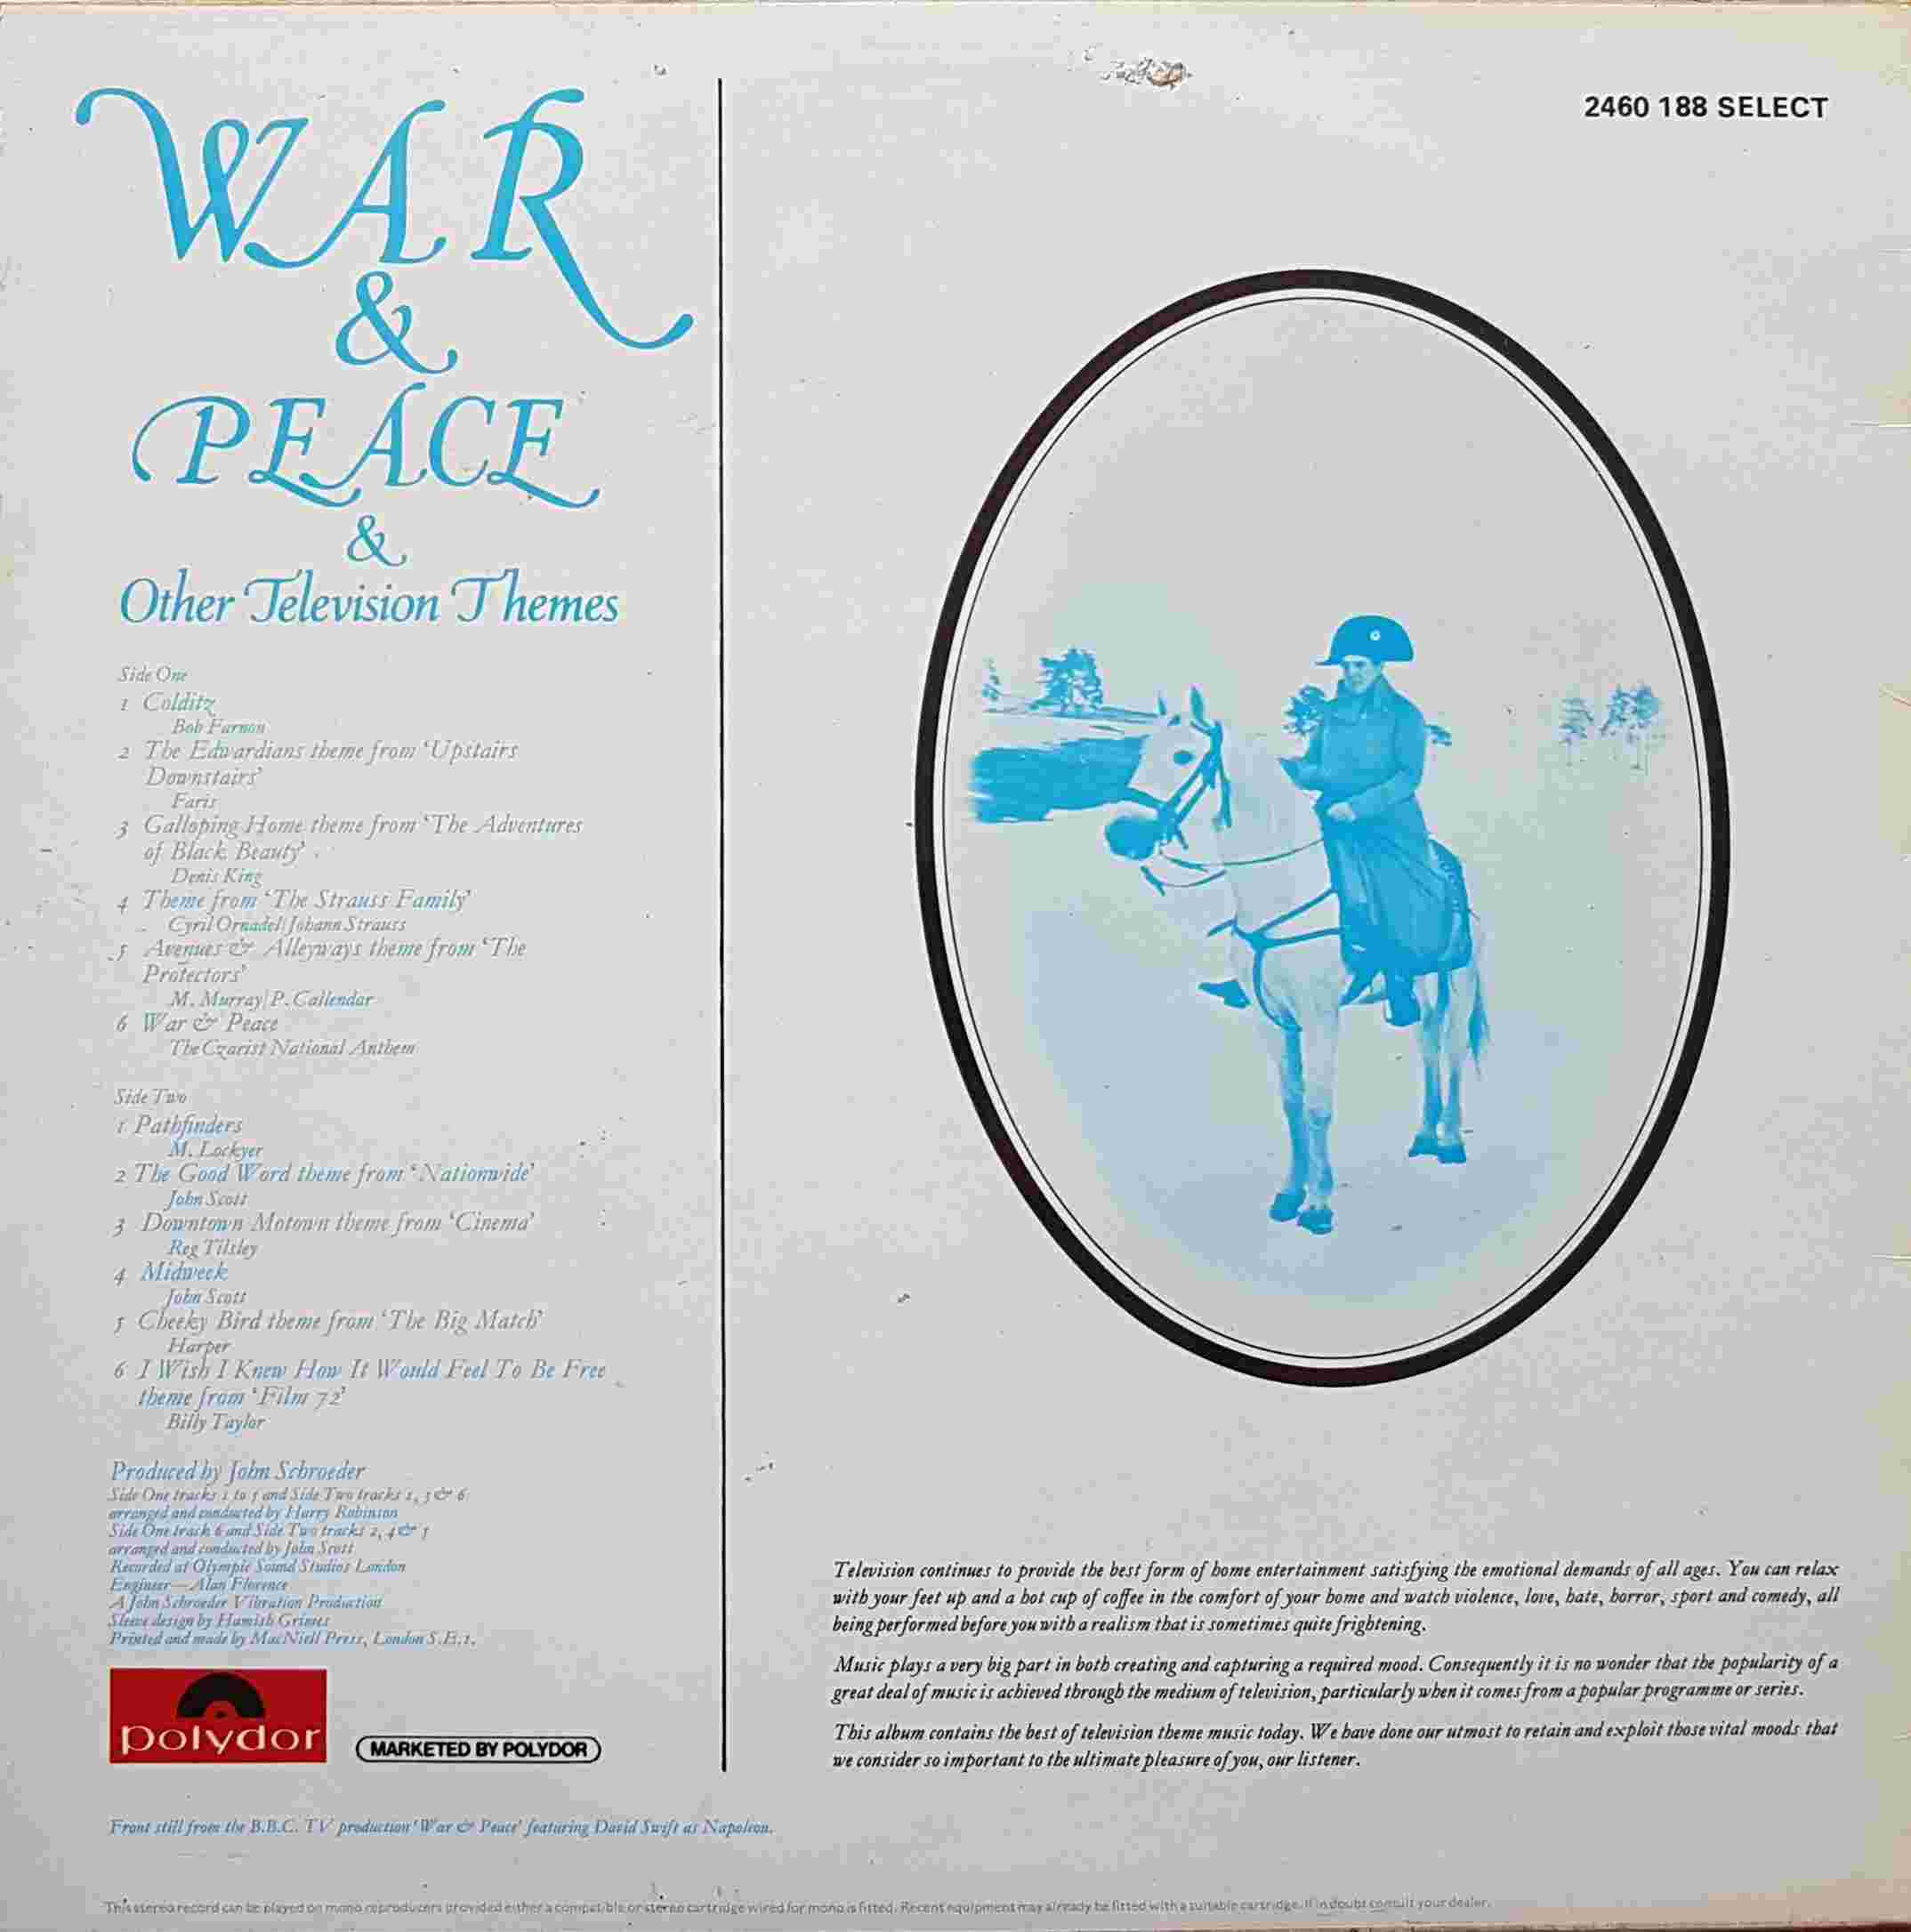 Picture of 2460 188 War and peace and other TV themes by artist Various from ITV, Channel 4 and Channel 5 library